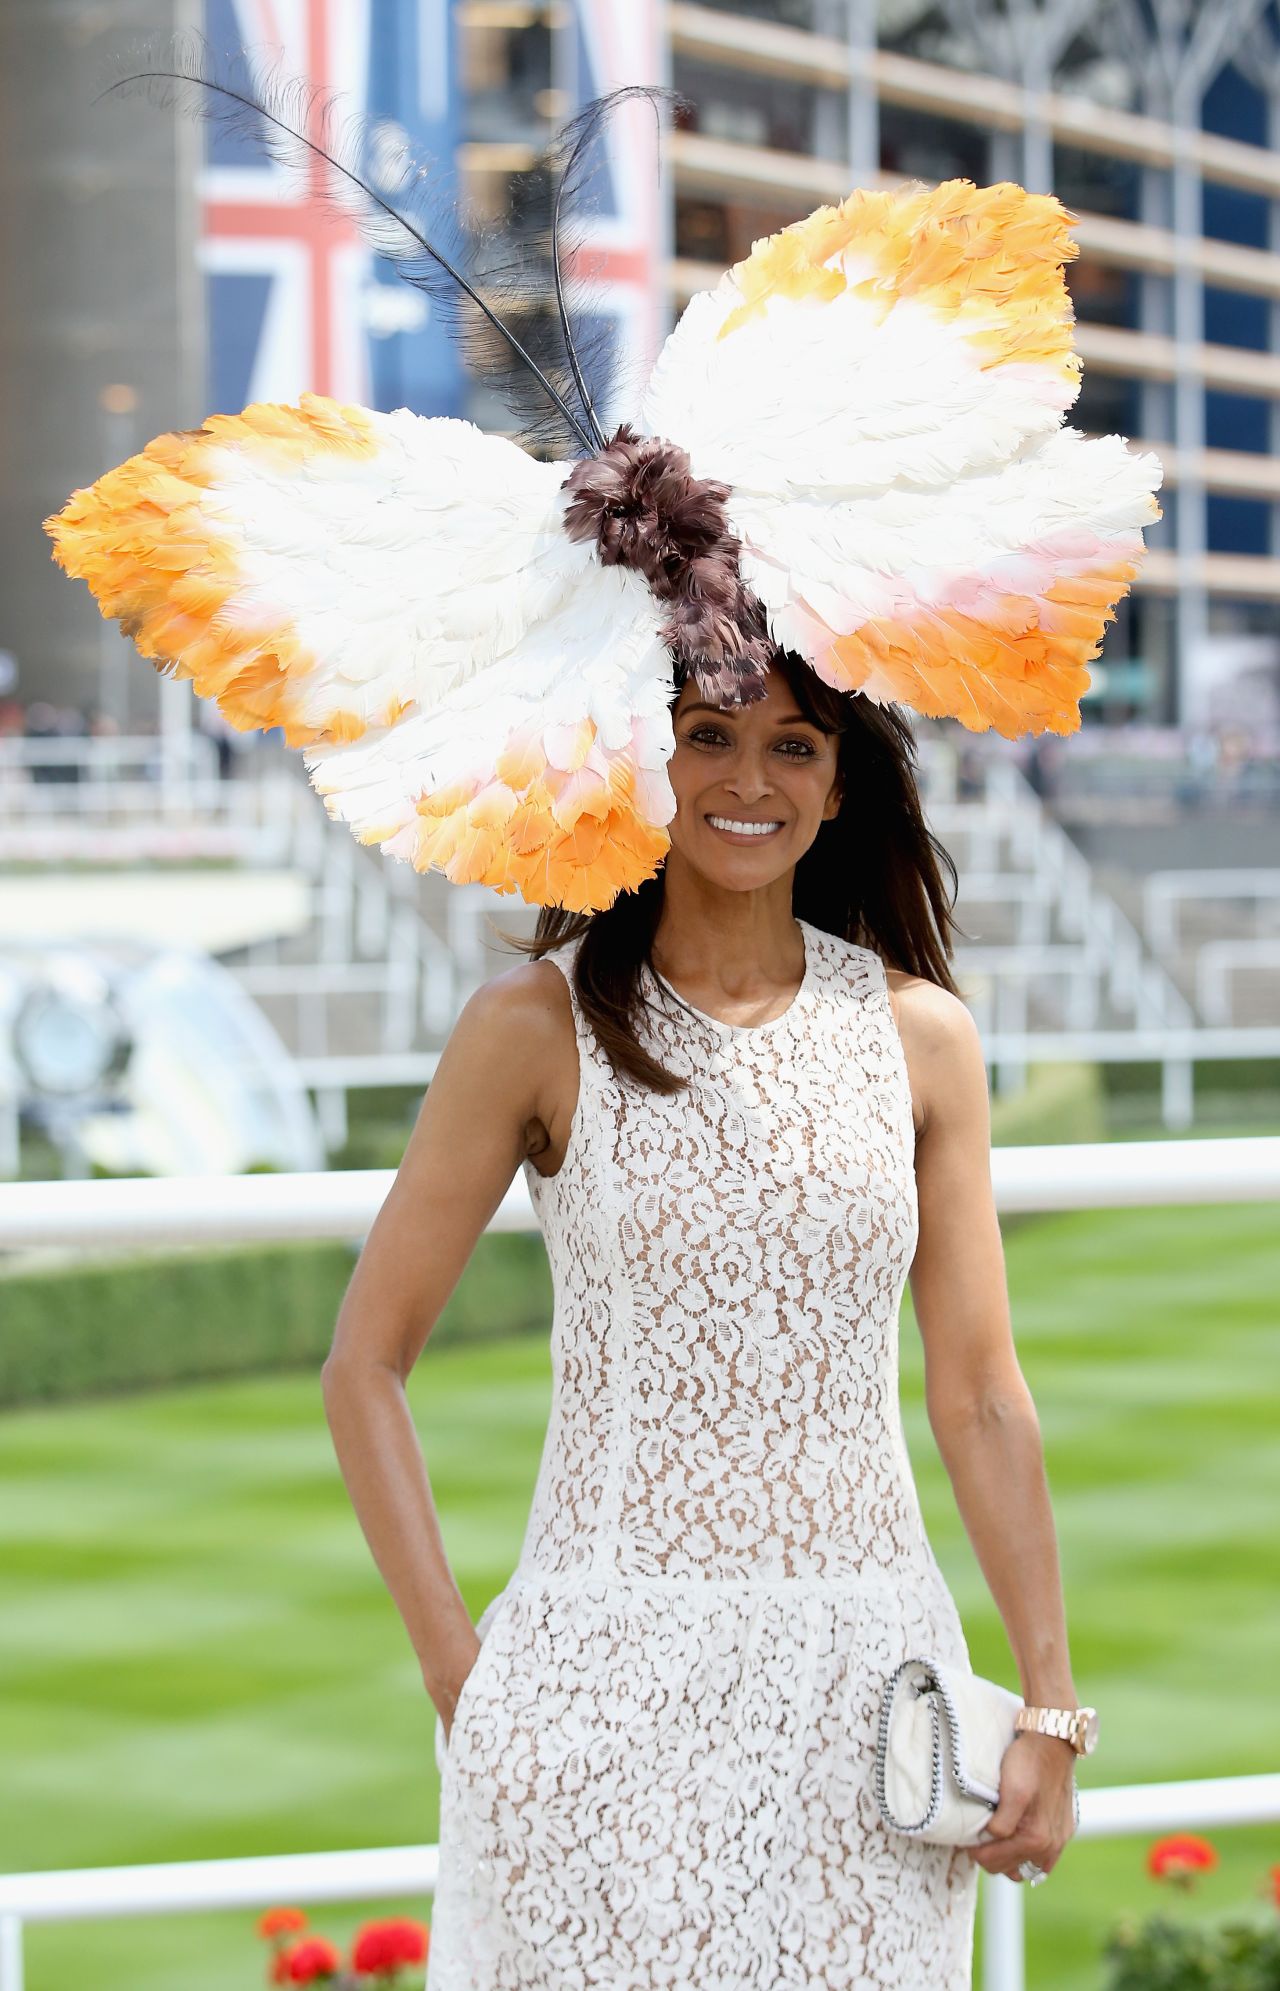 But the five days of Royal Ascot are as much about fashion parade as they are watching some of the world's best horses on track.